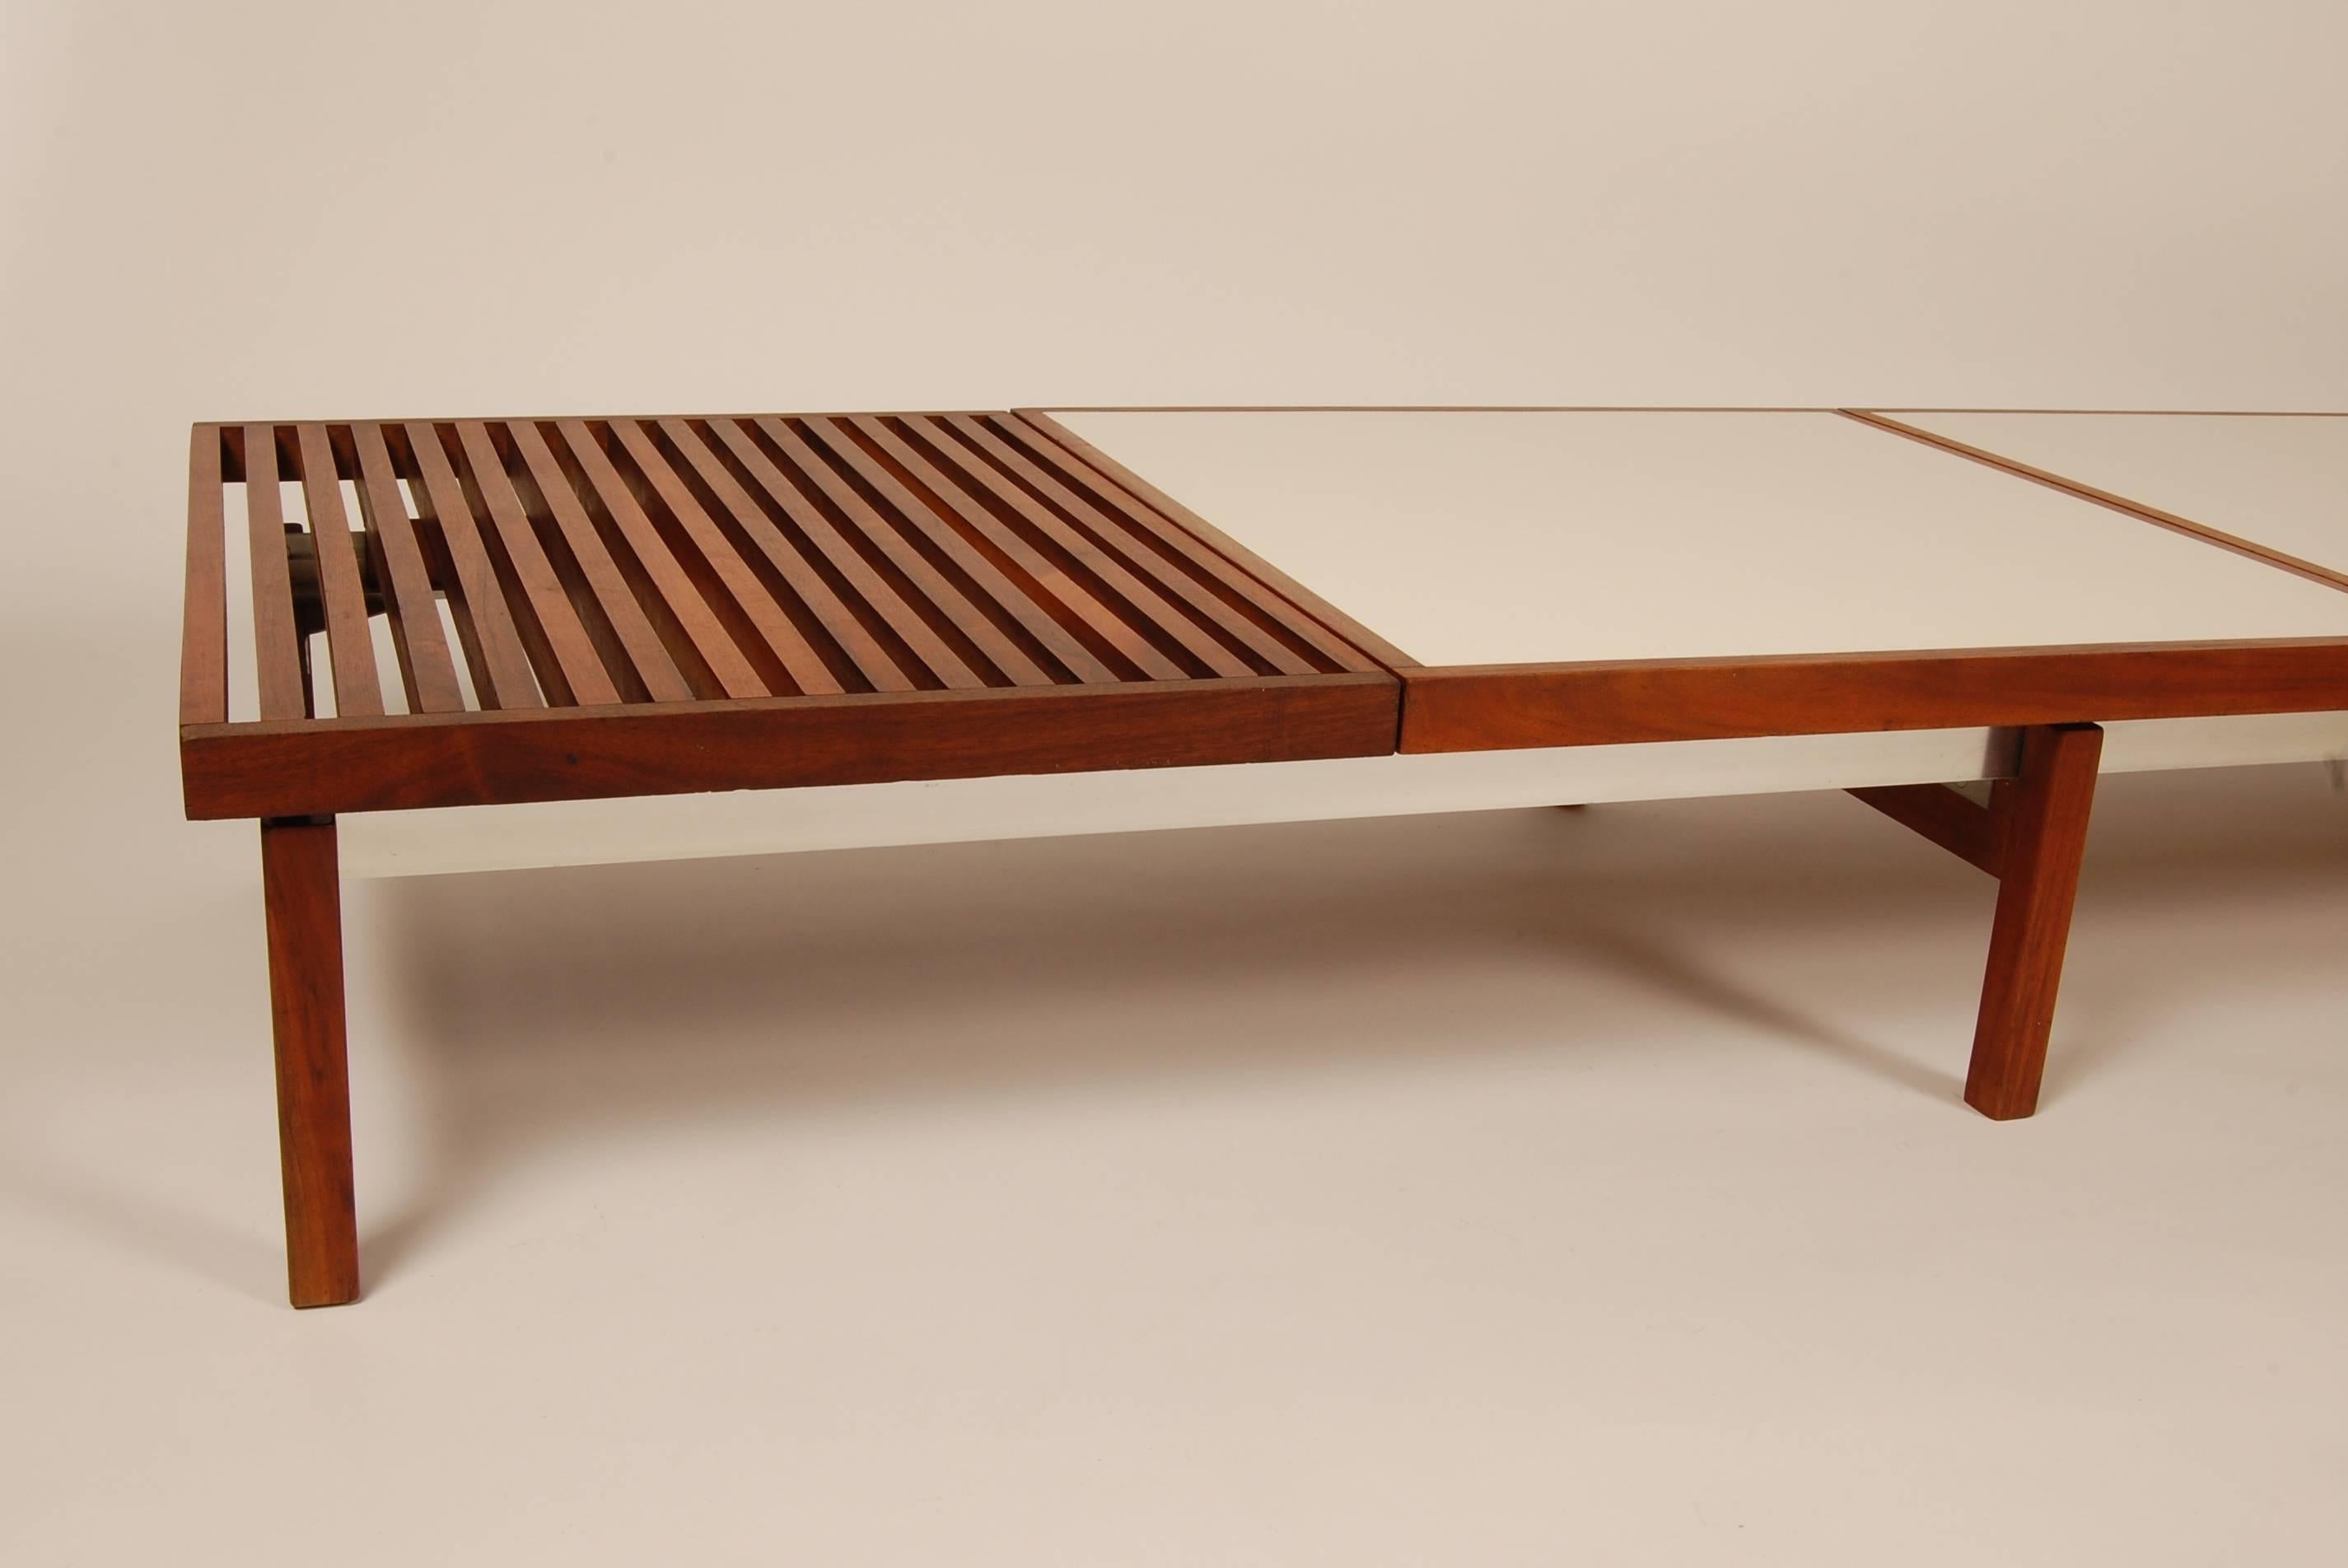 Other Case Study Bench / Coffee Table